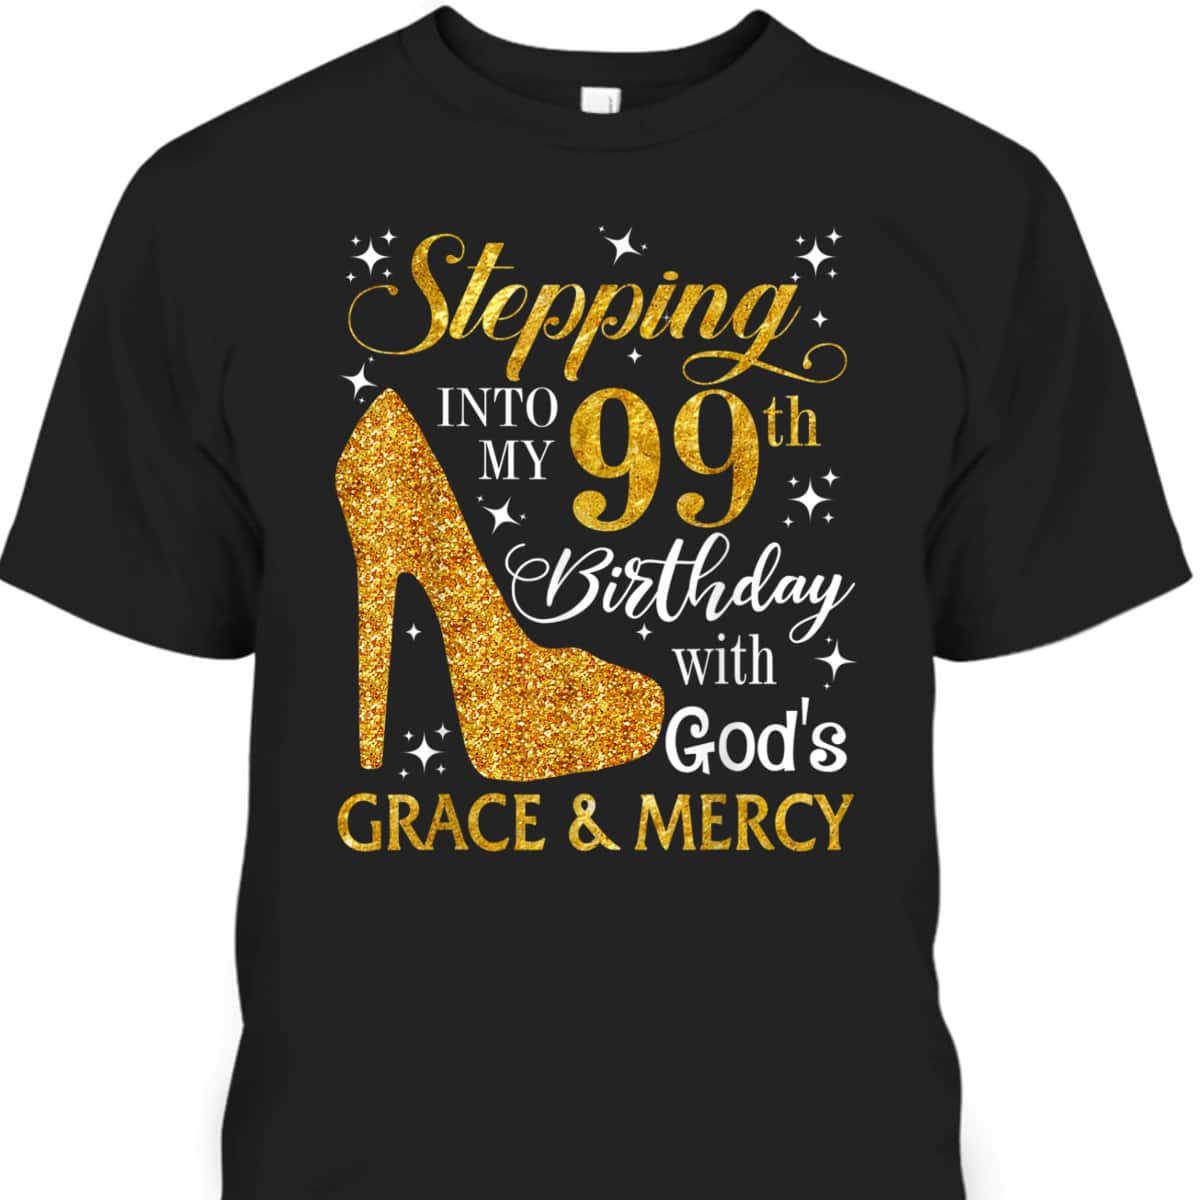 Christian Stepping Into My 99th Birthday With God's Grace & Mercy T-Shirt